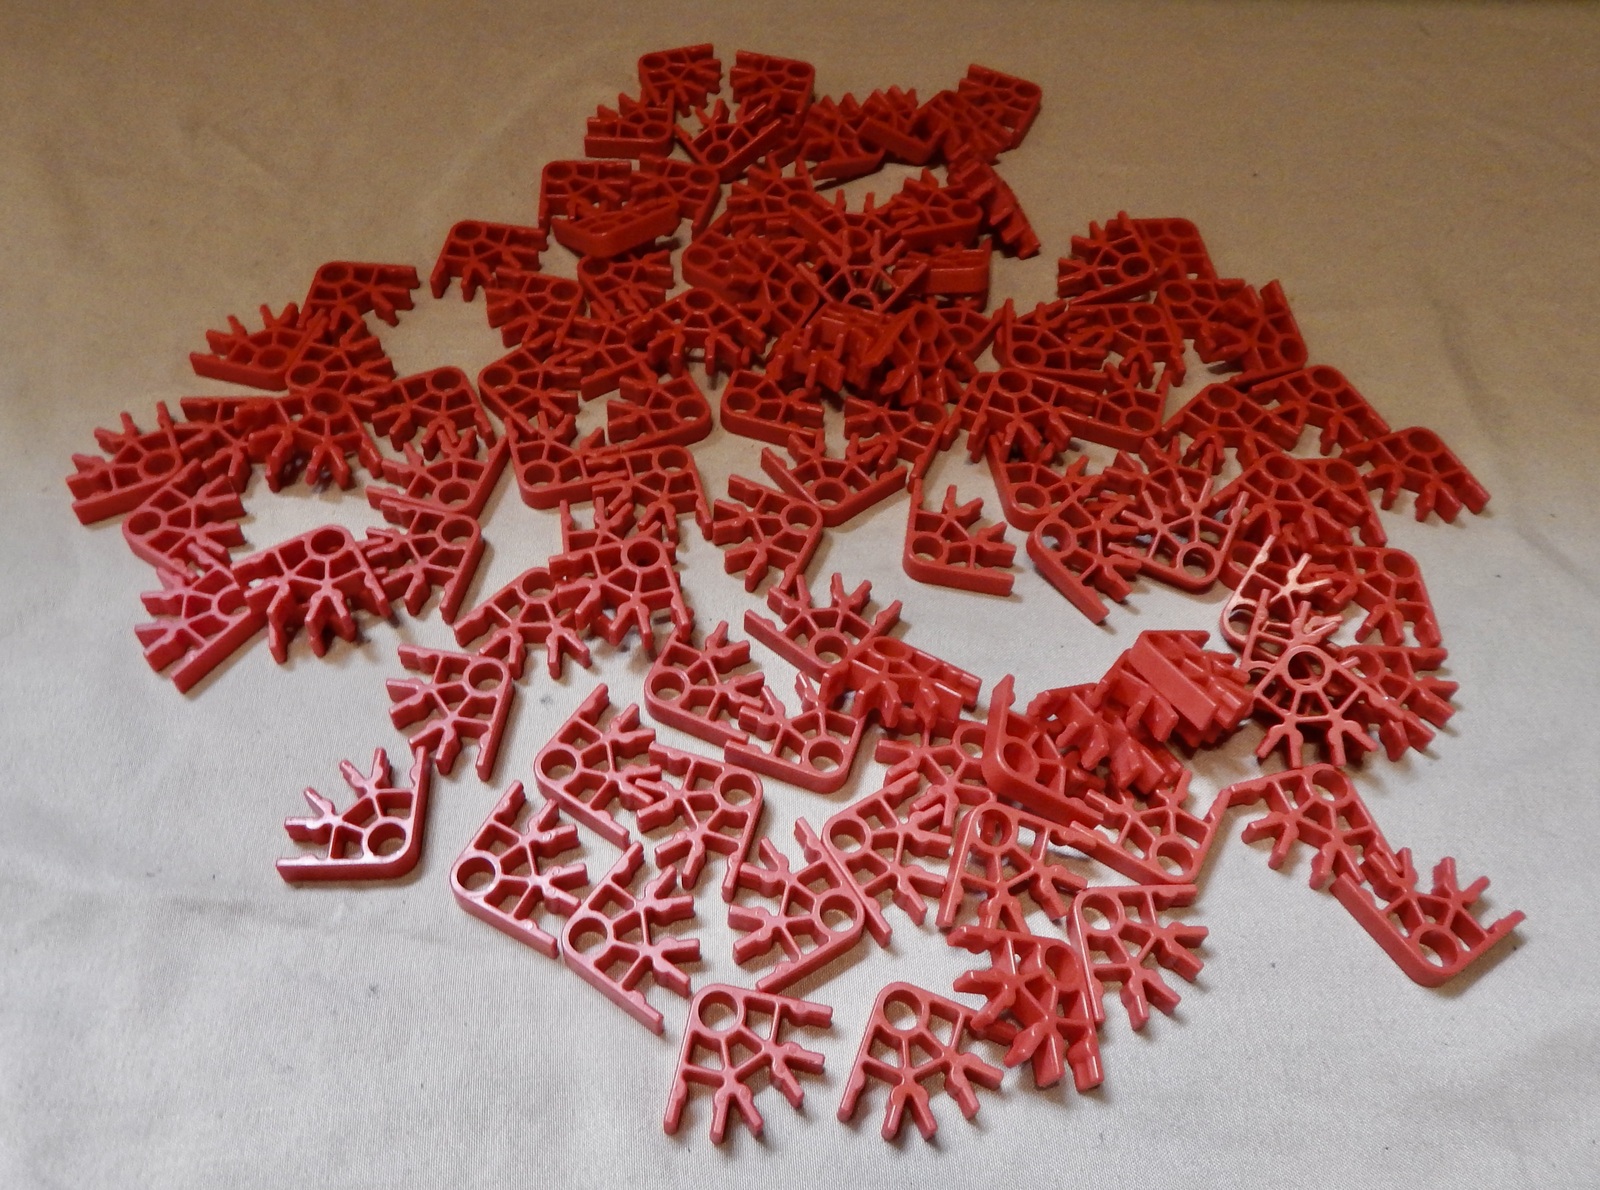 K'NEX Building Toys Bulk Lot Parts 106pc Three Position Red Slotted Knex 238F - $9.49